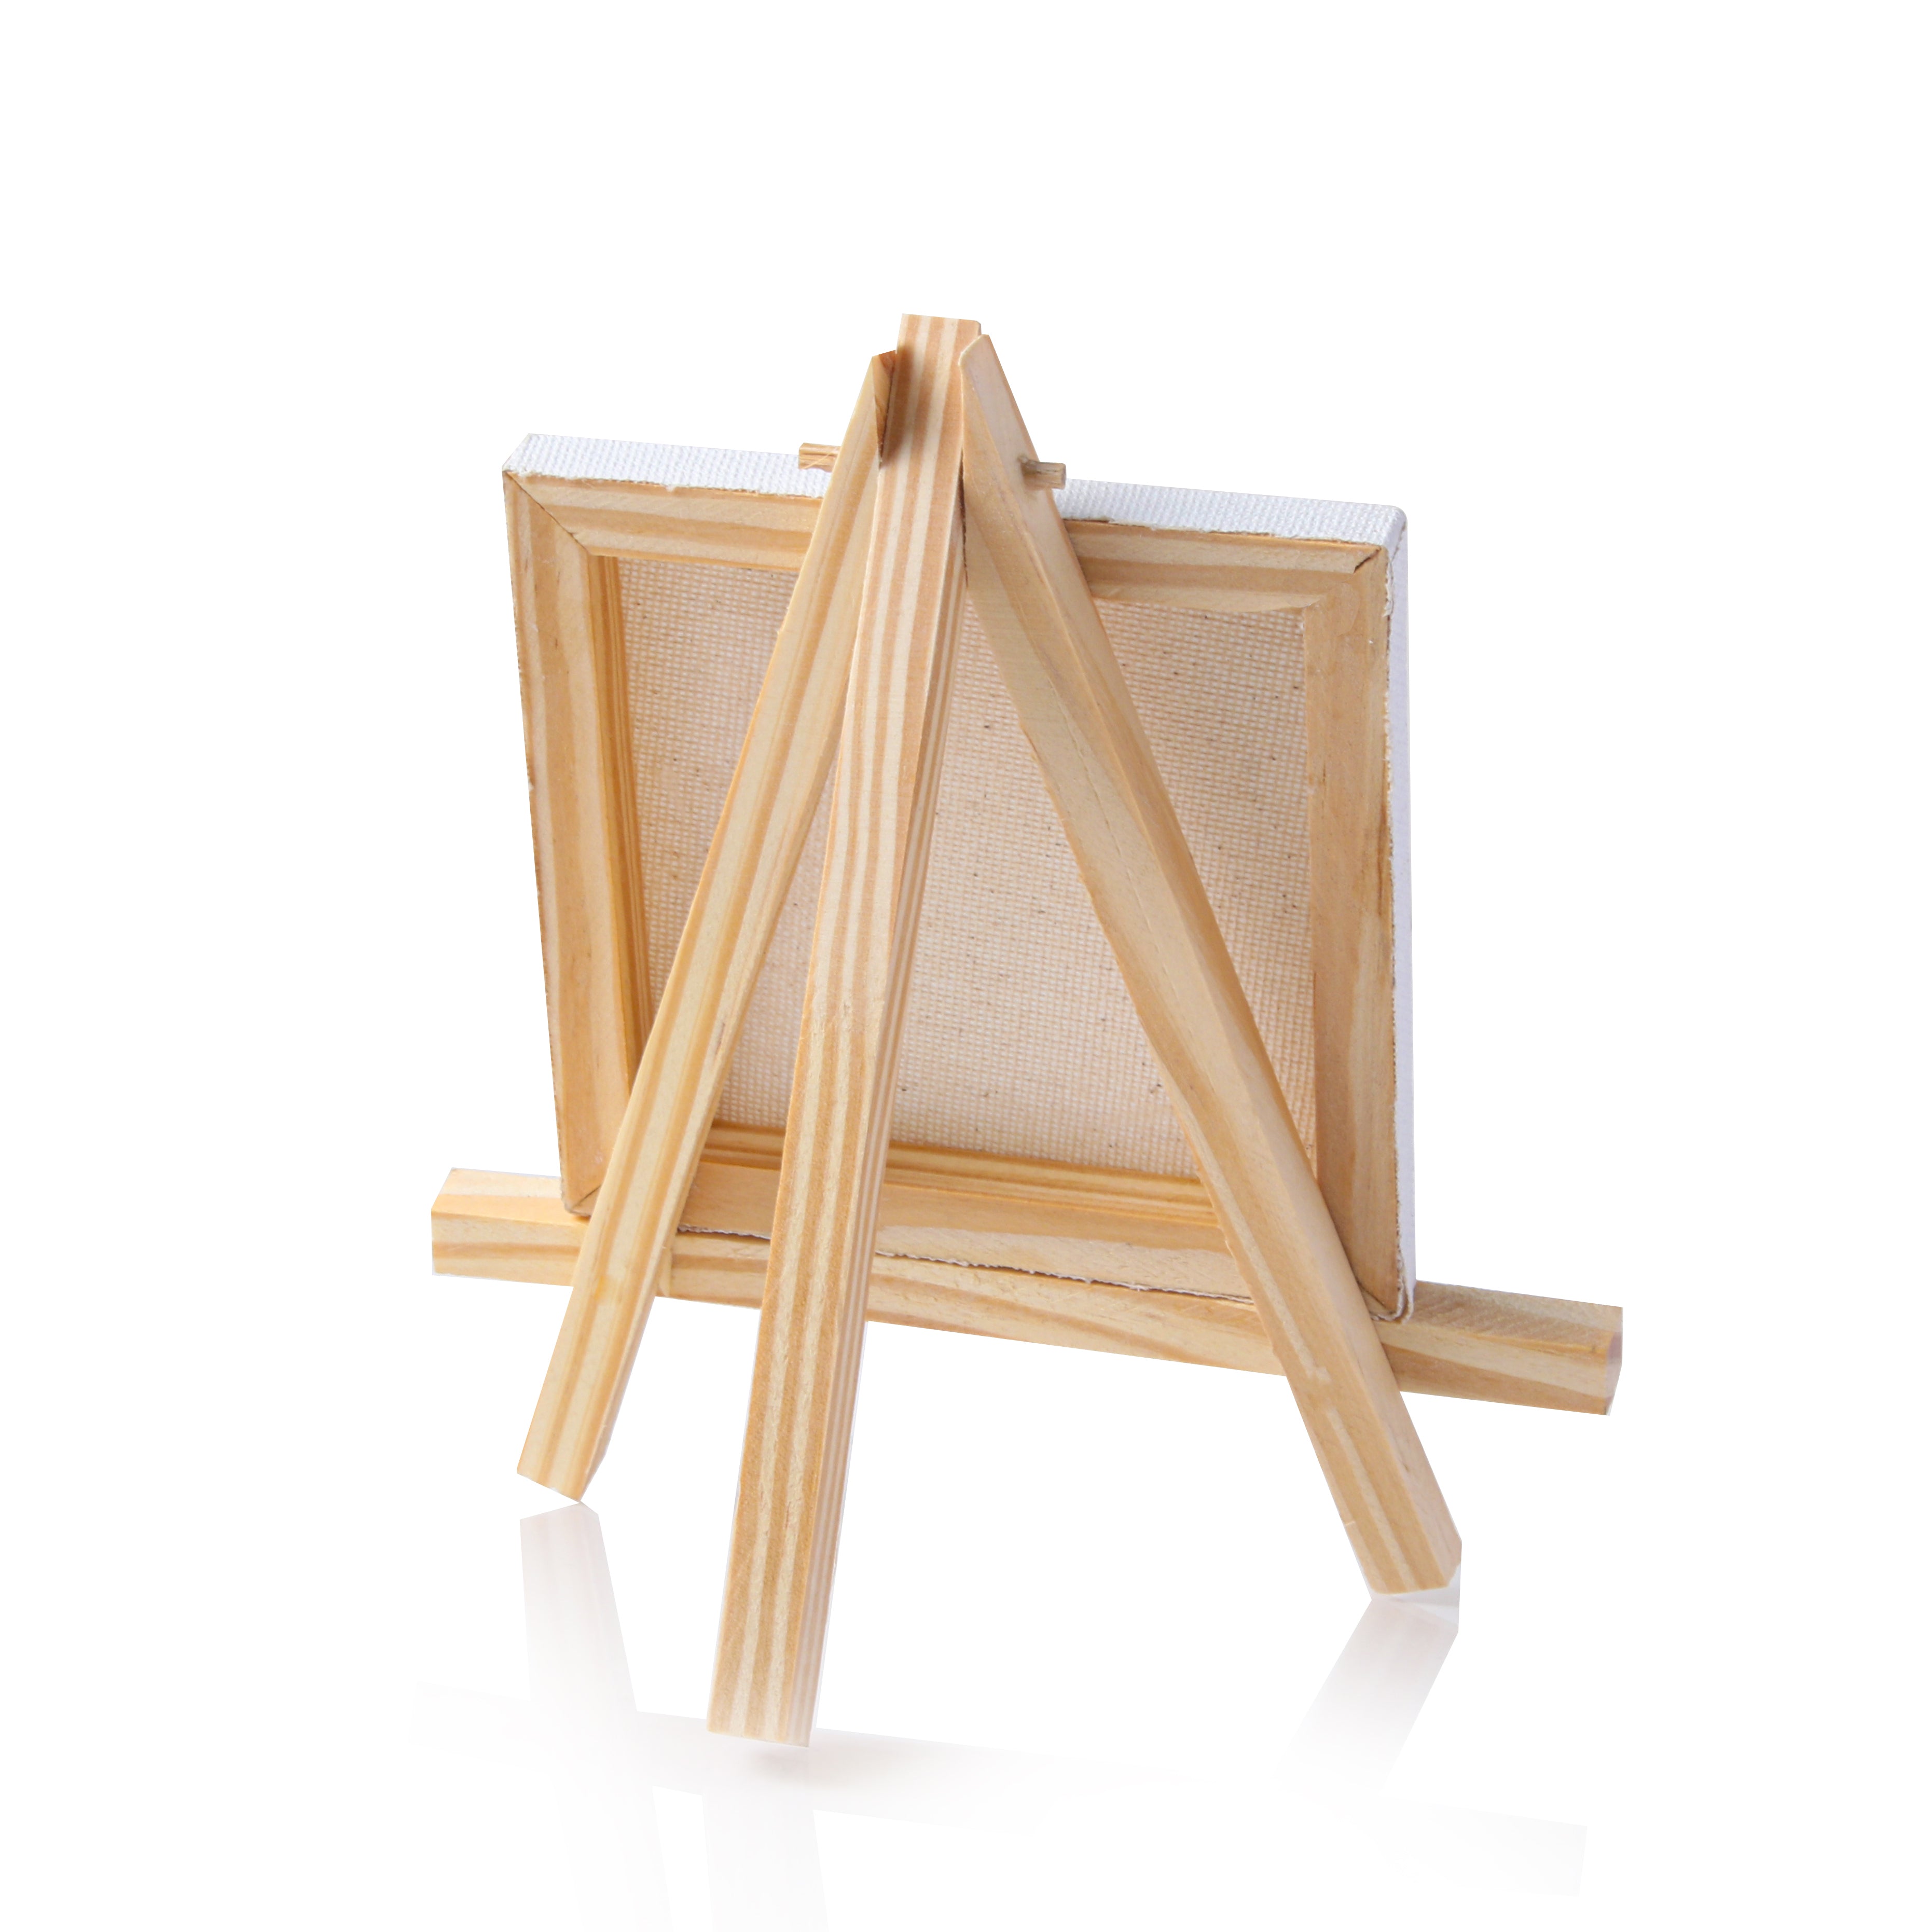 Wooden Mini Easel With Canvas Easel Size 15cm Canvas Size 10 X 10cm Set of 5pc